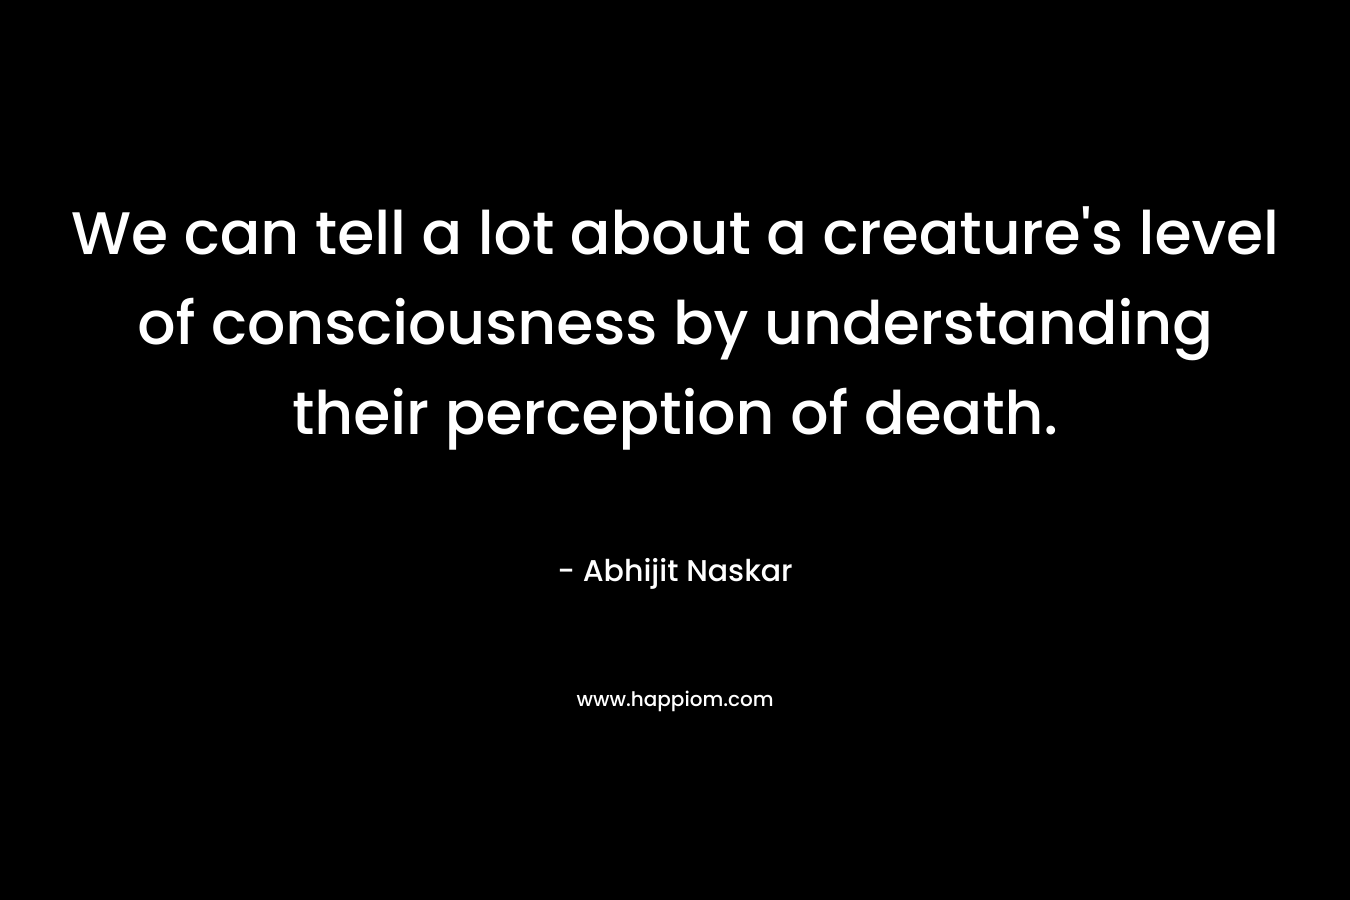 We can tell a lot about a creature's level of consciousness by understanding their perception of death.